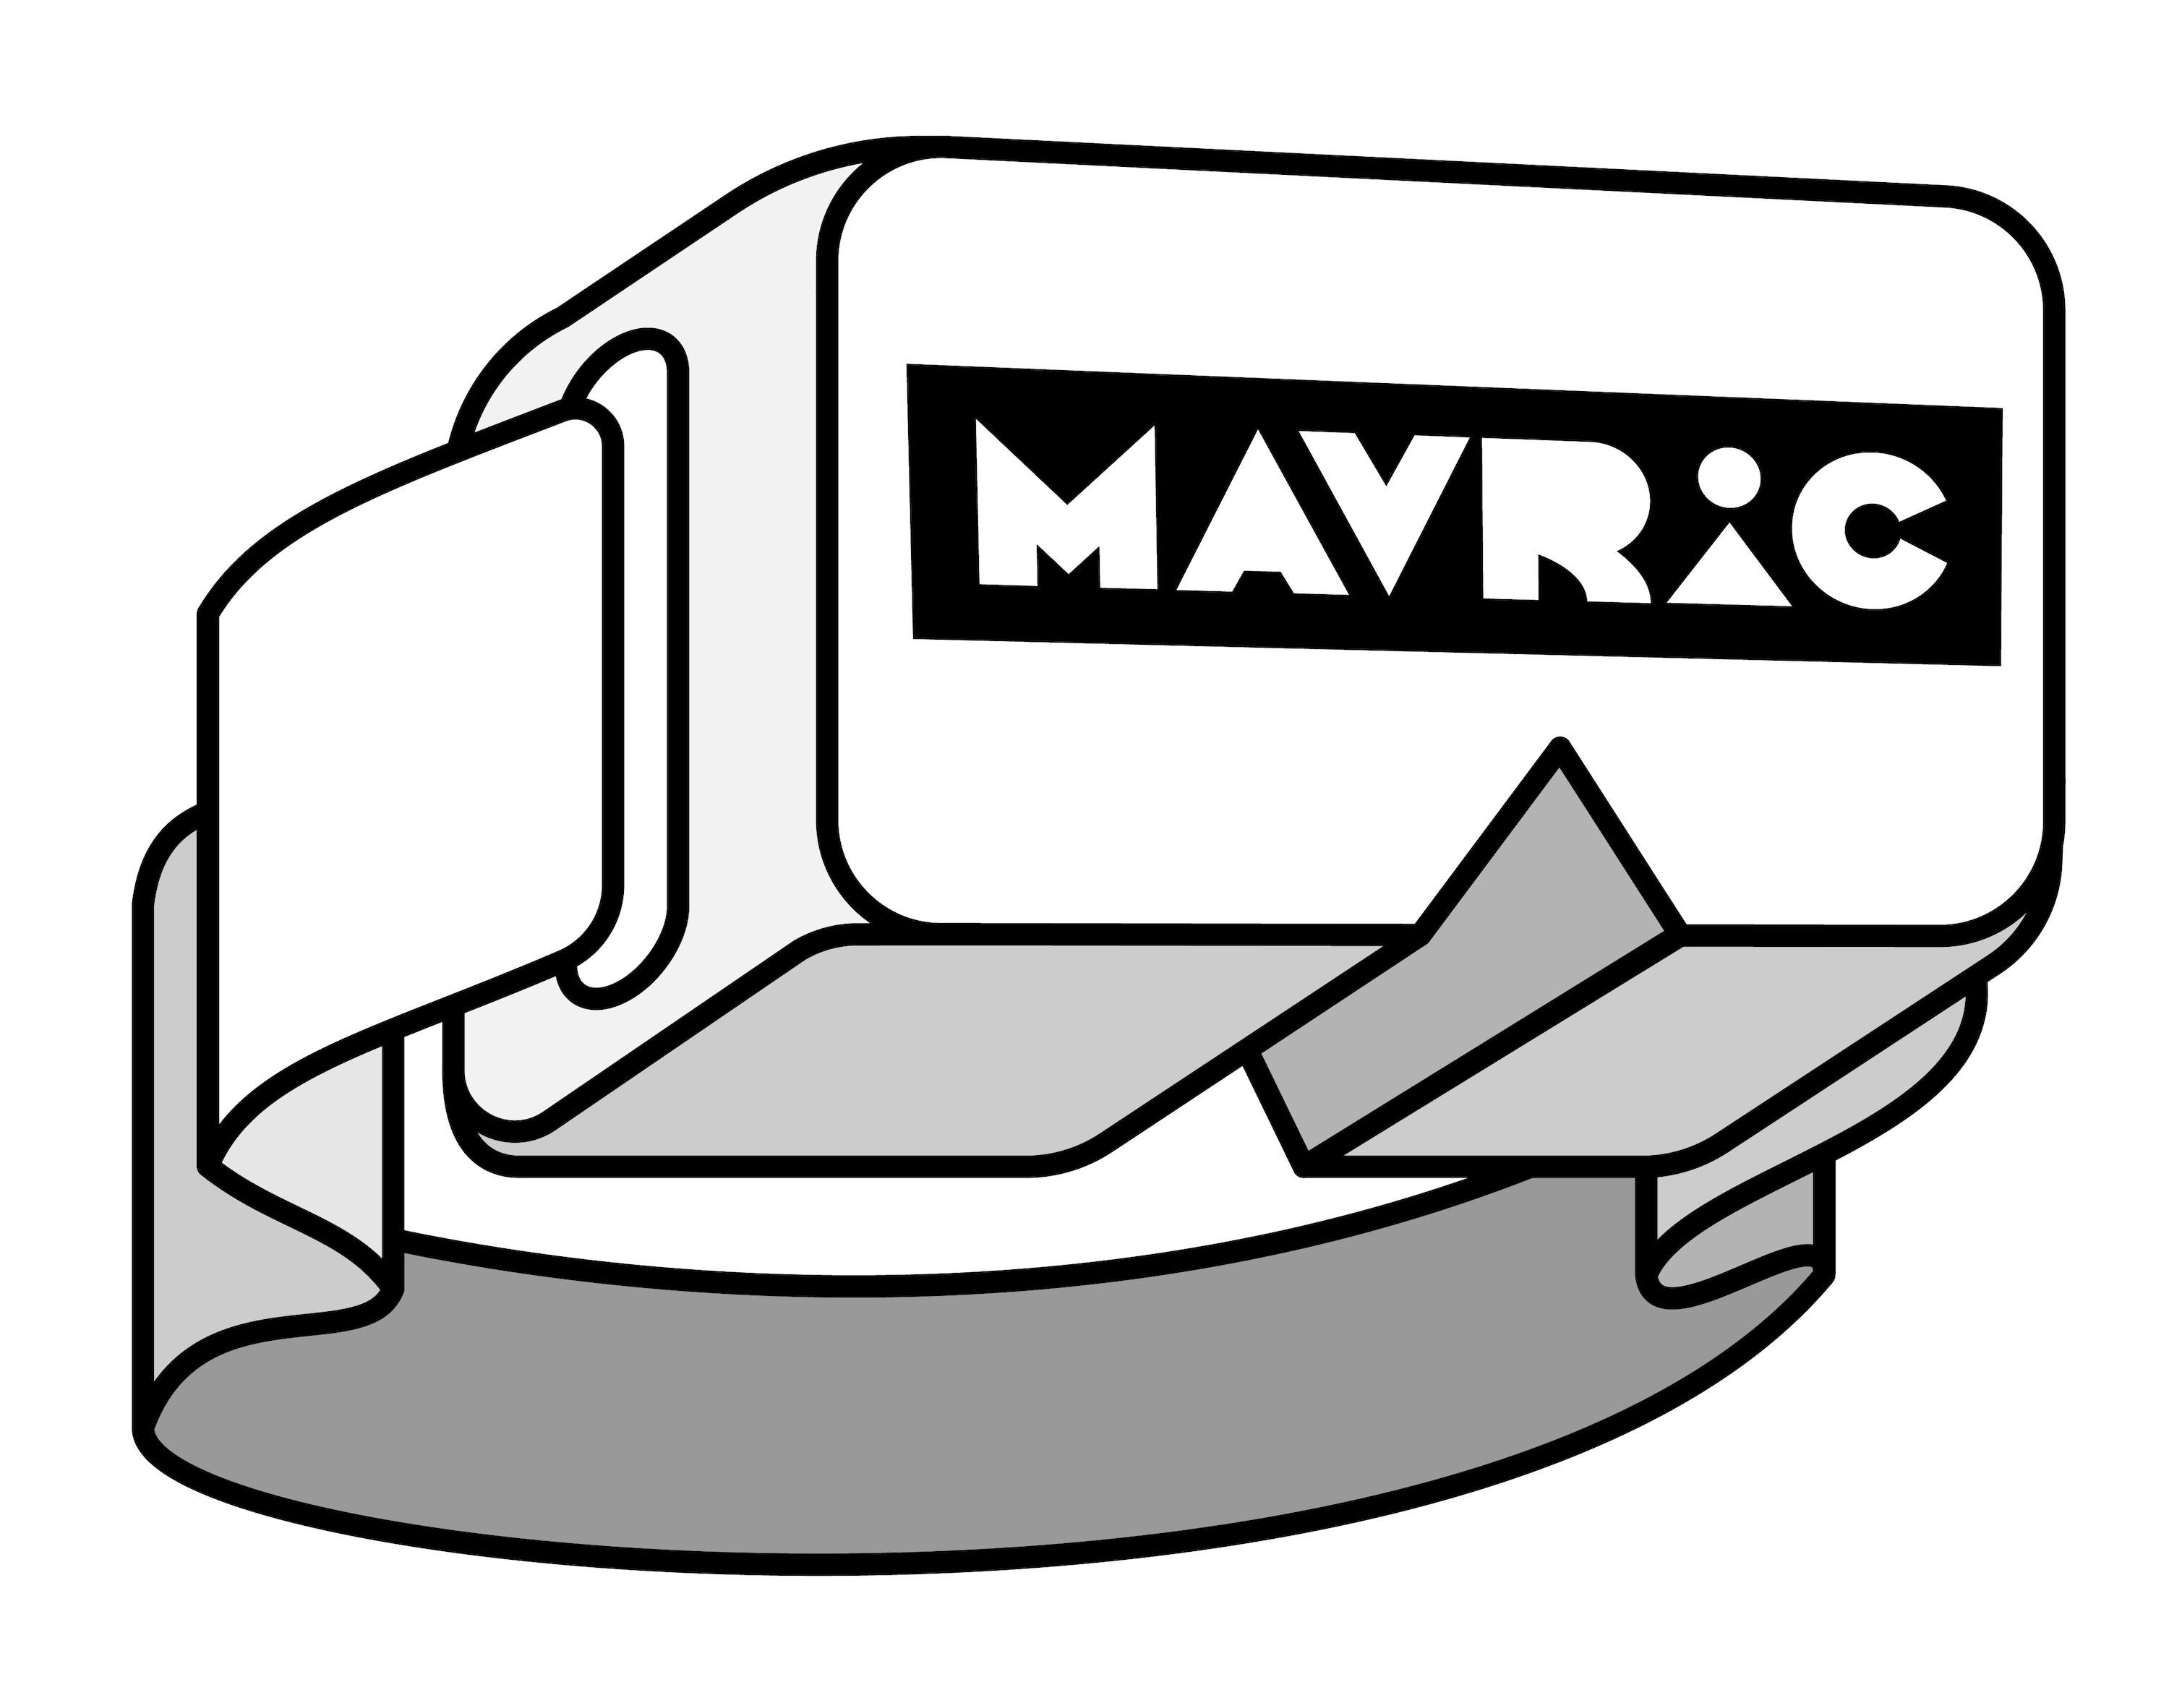 MAVRIC logo in a vector VR headset